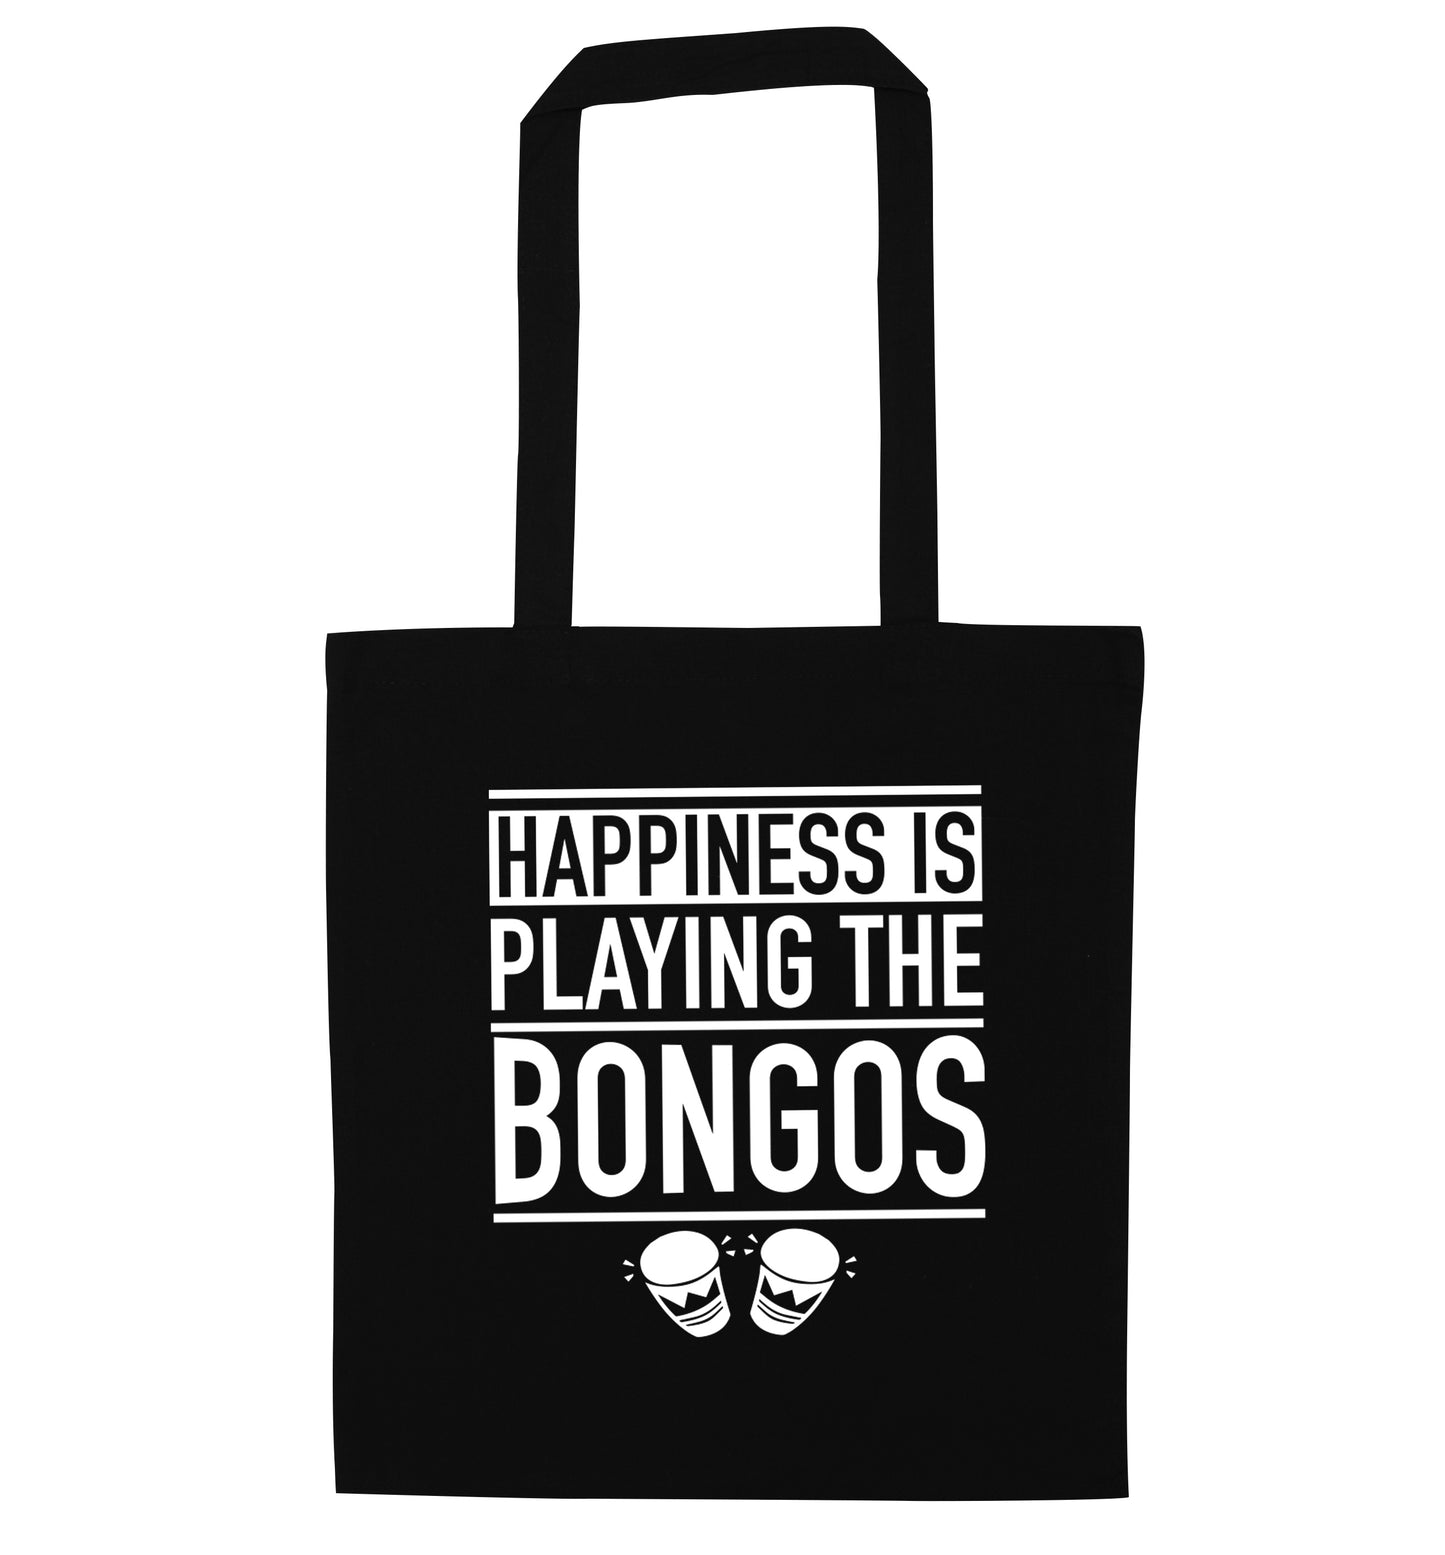 Happiness is playing the bongos black tote bag